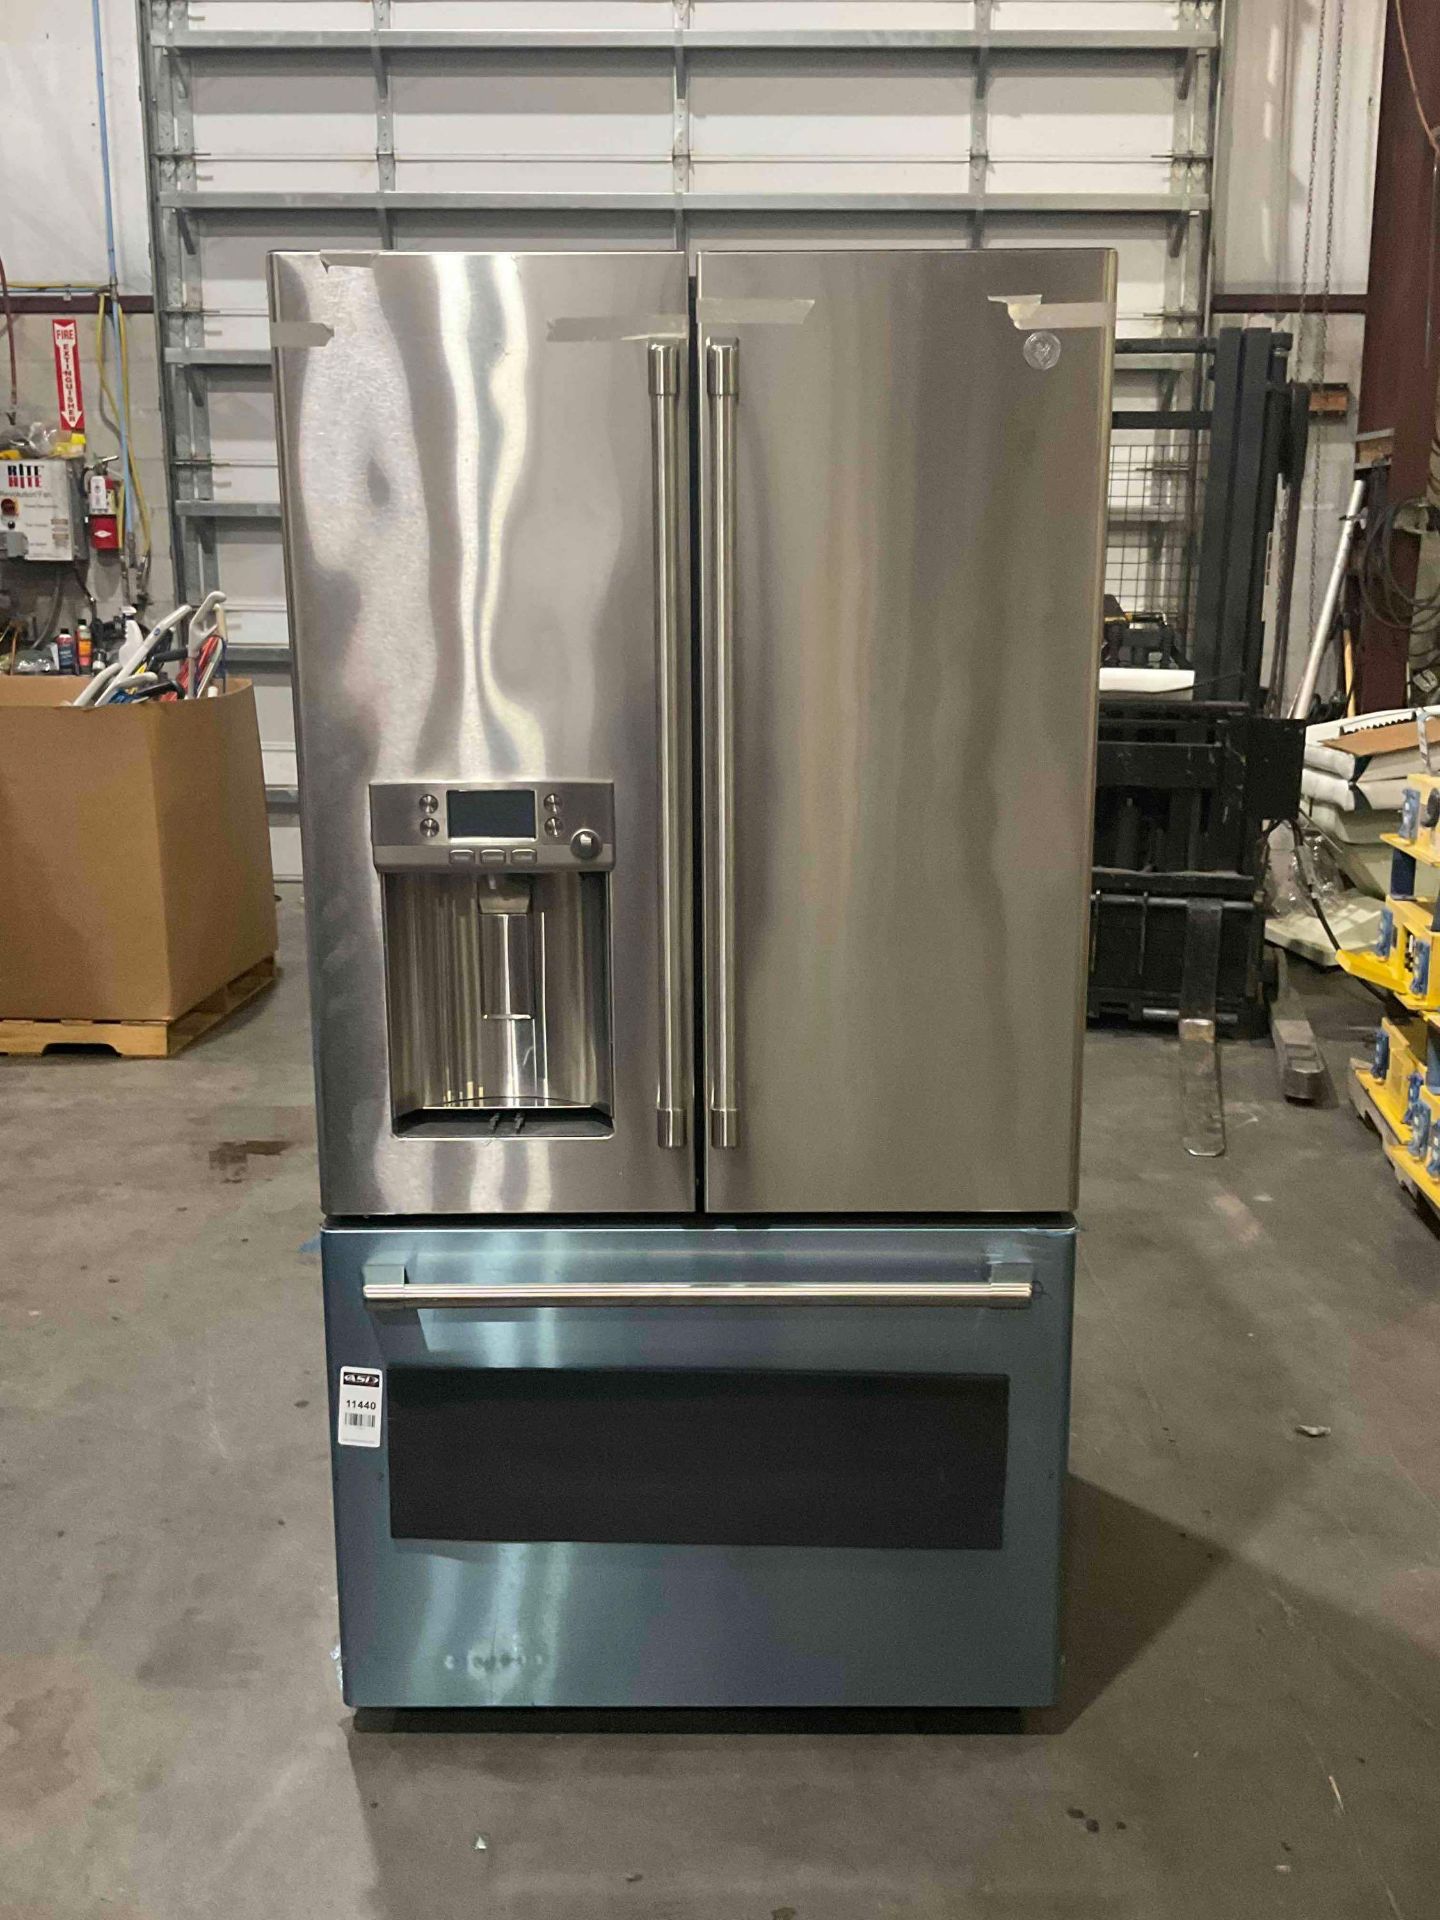 CAFE BY GE SMART FREESTANDING FRENCH DOOR REFRIGERATOR, APPROX 36" W x 70" T x 37 " D, APPROX TOTAL